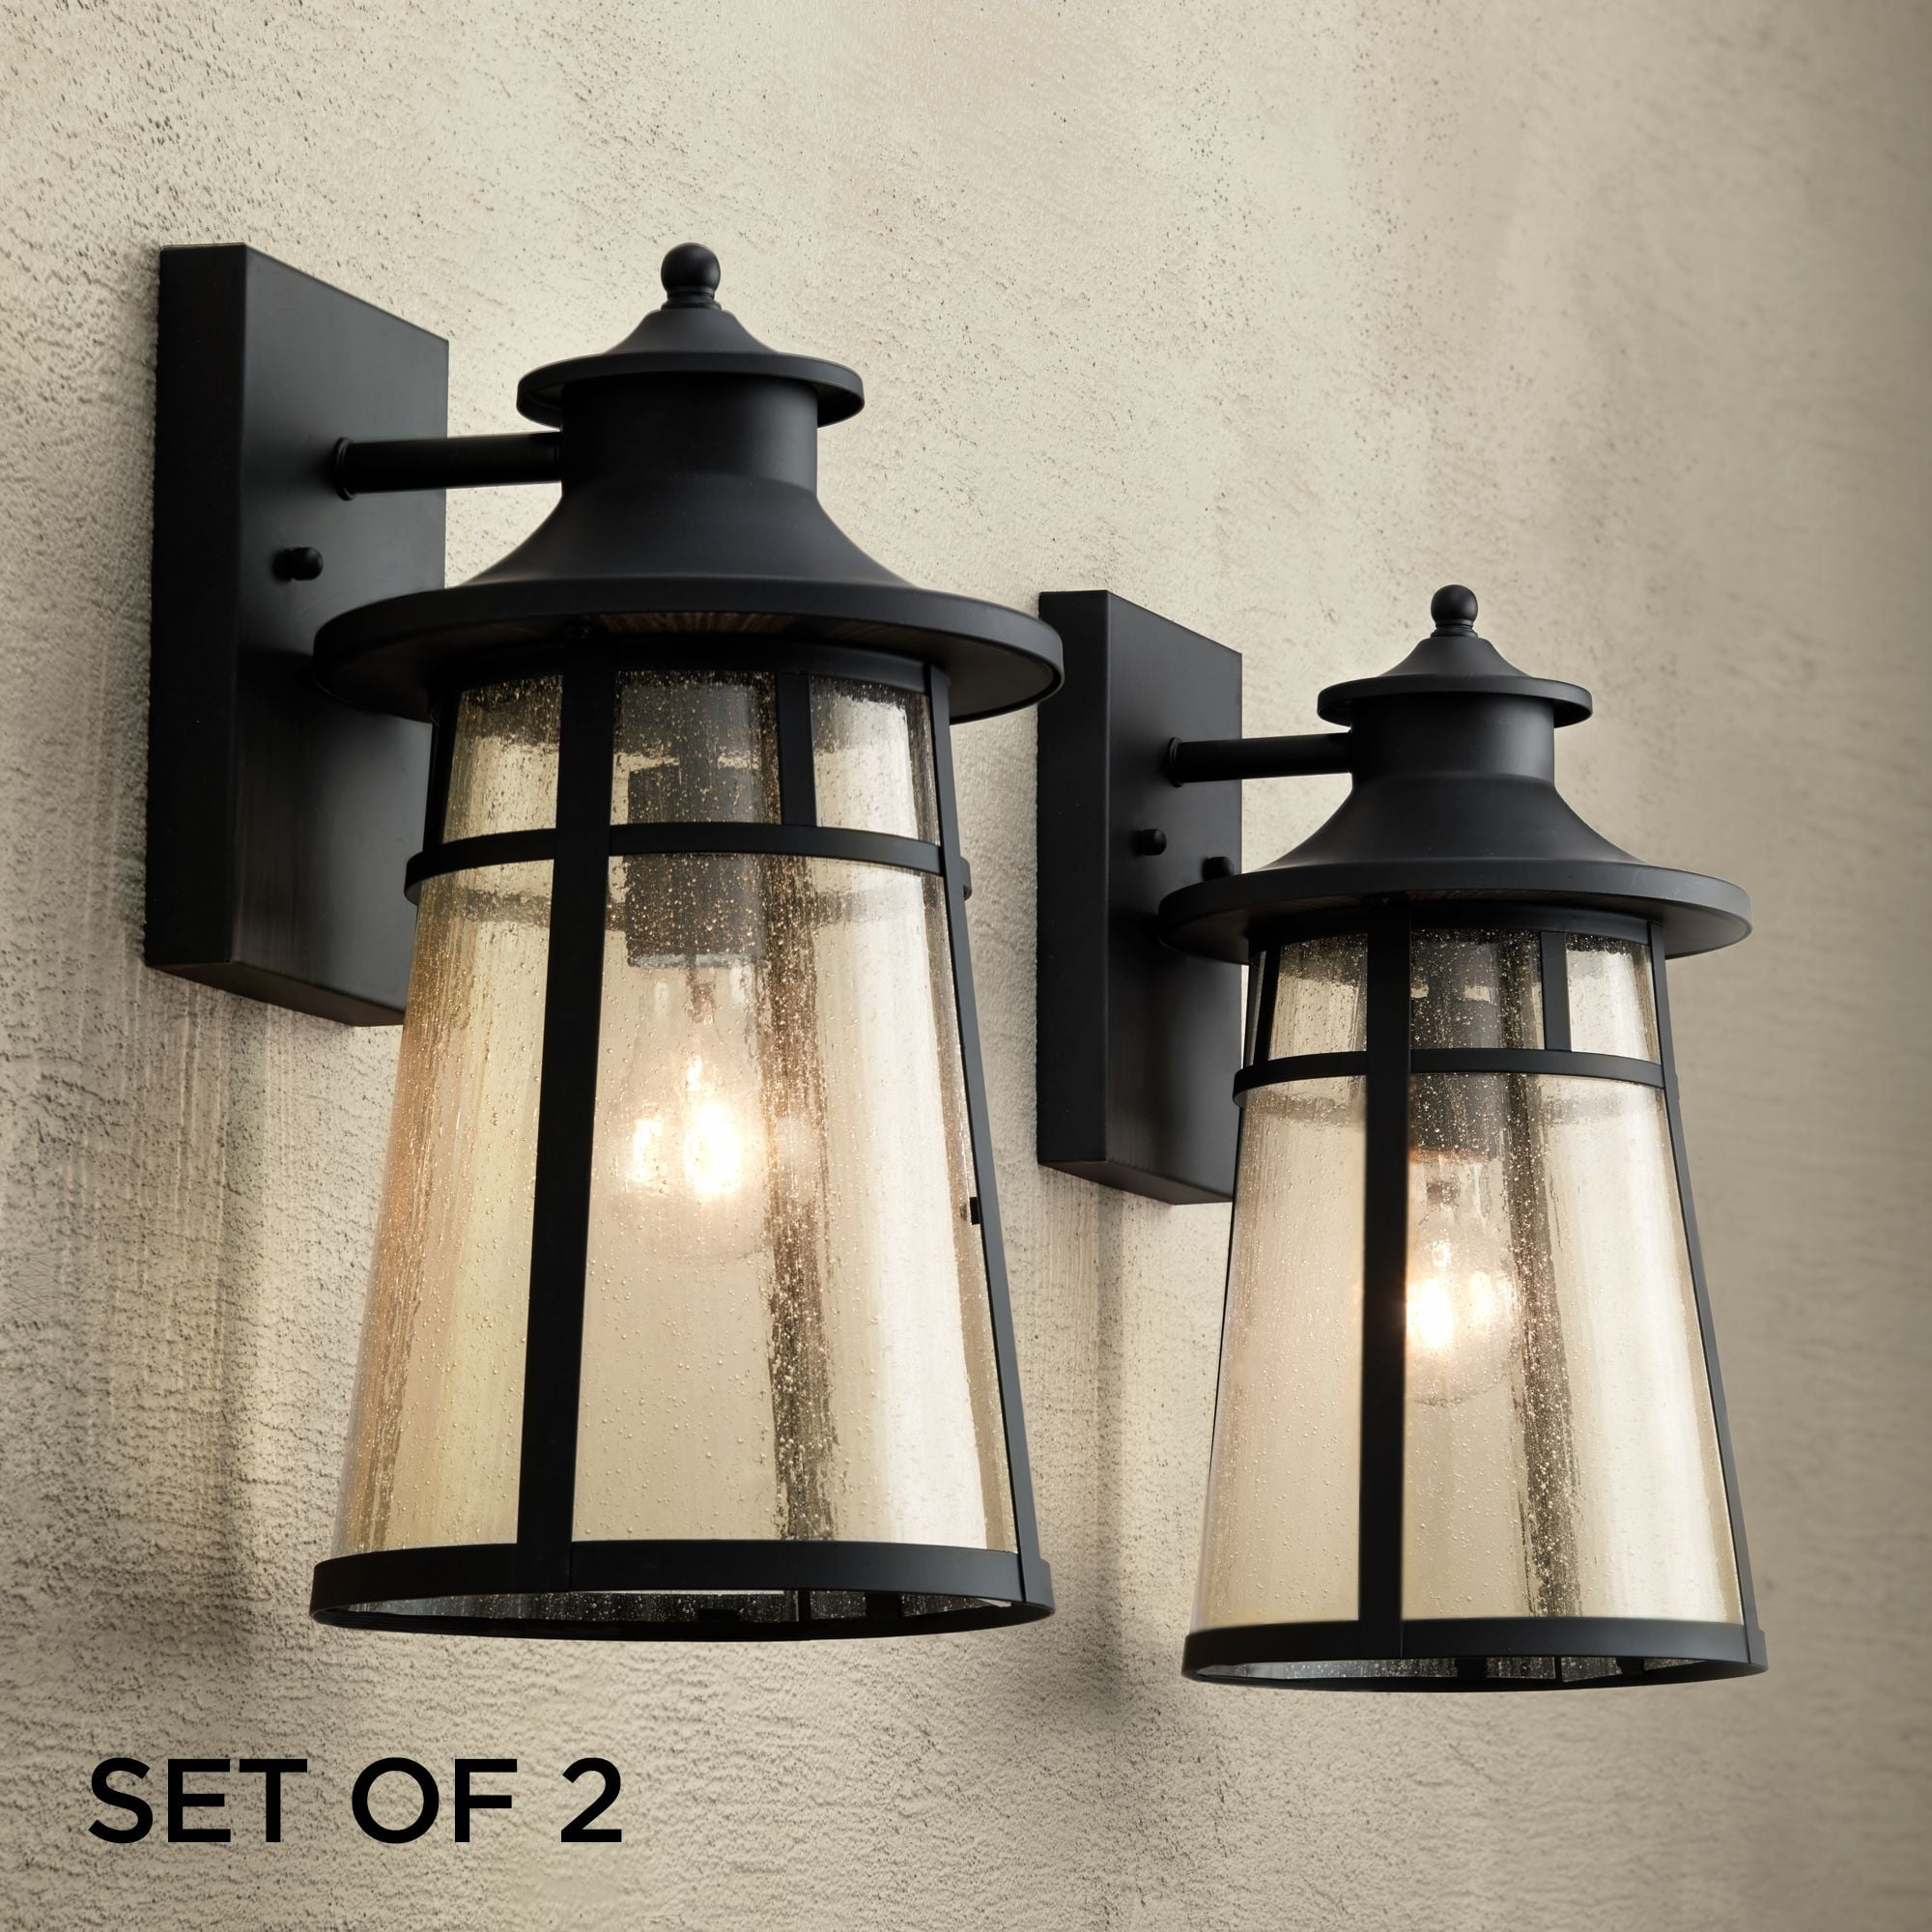 Pack Of 2 New Outdoor Wall Lantern Sconce 